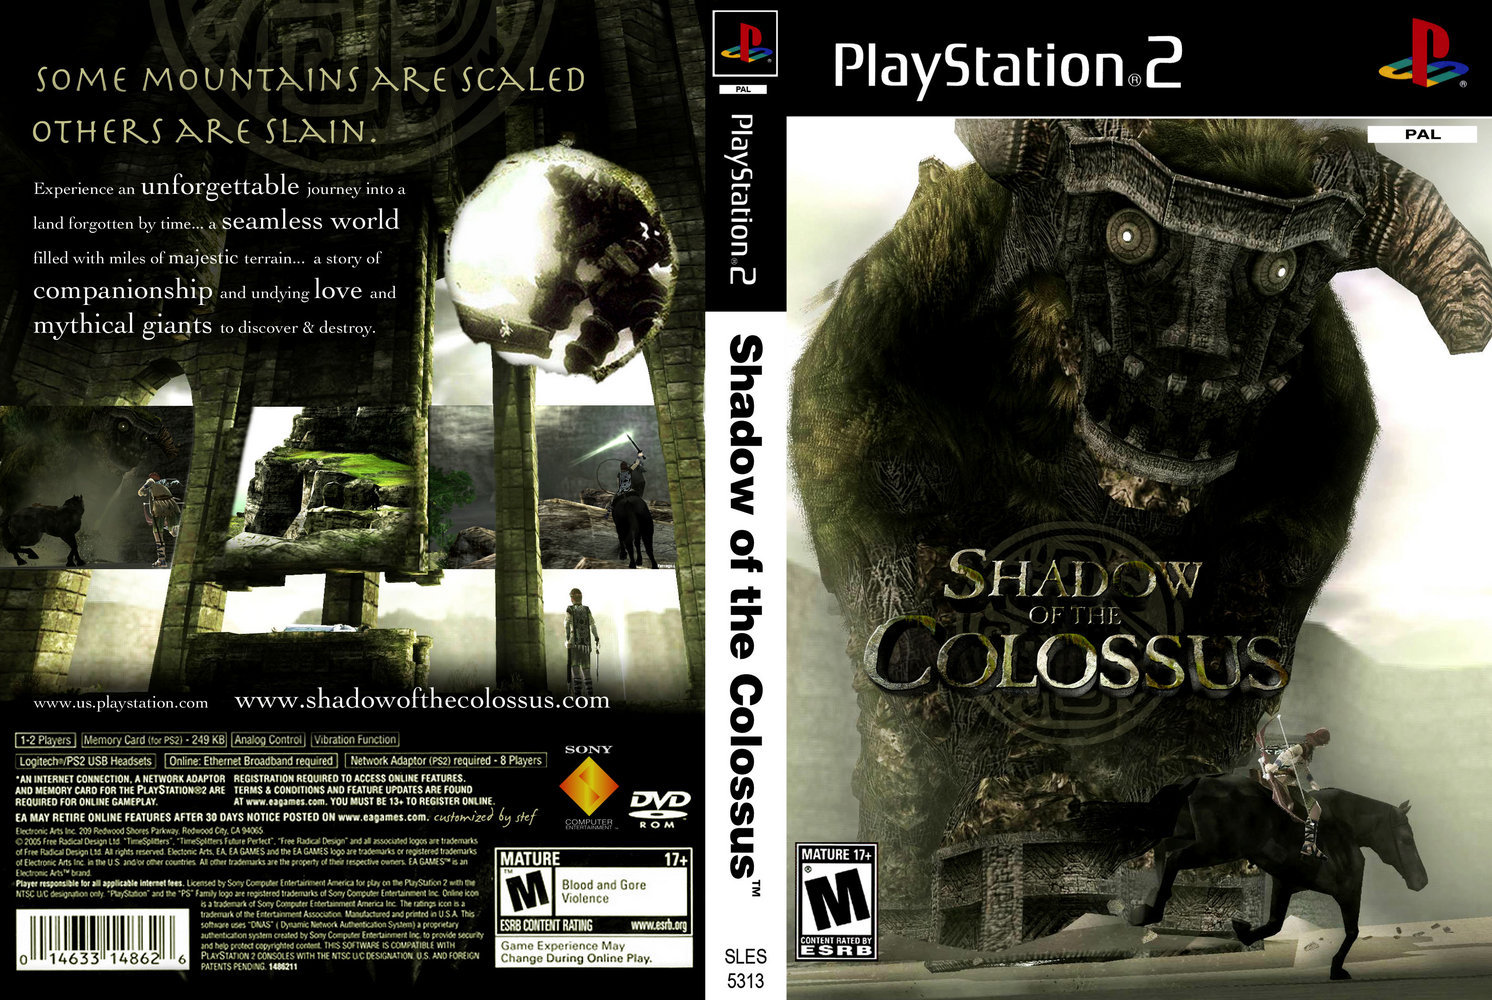 Covers Box Sk Shadow Of The Colossus High Quality Dvd